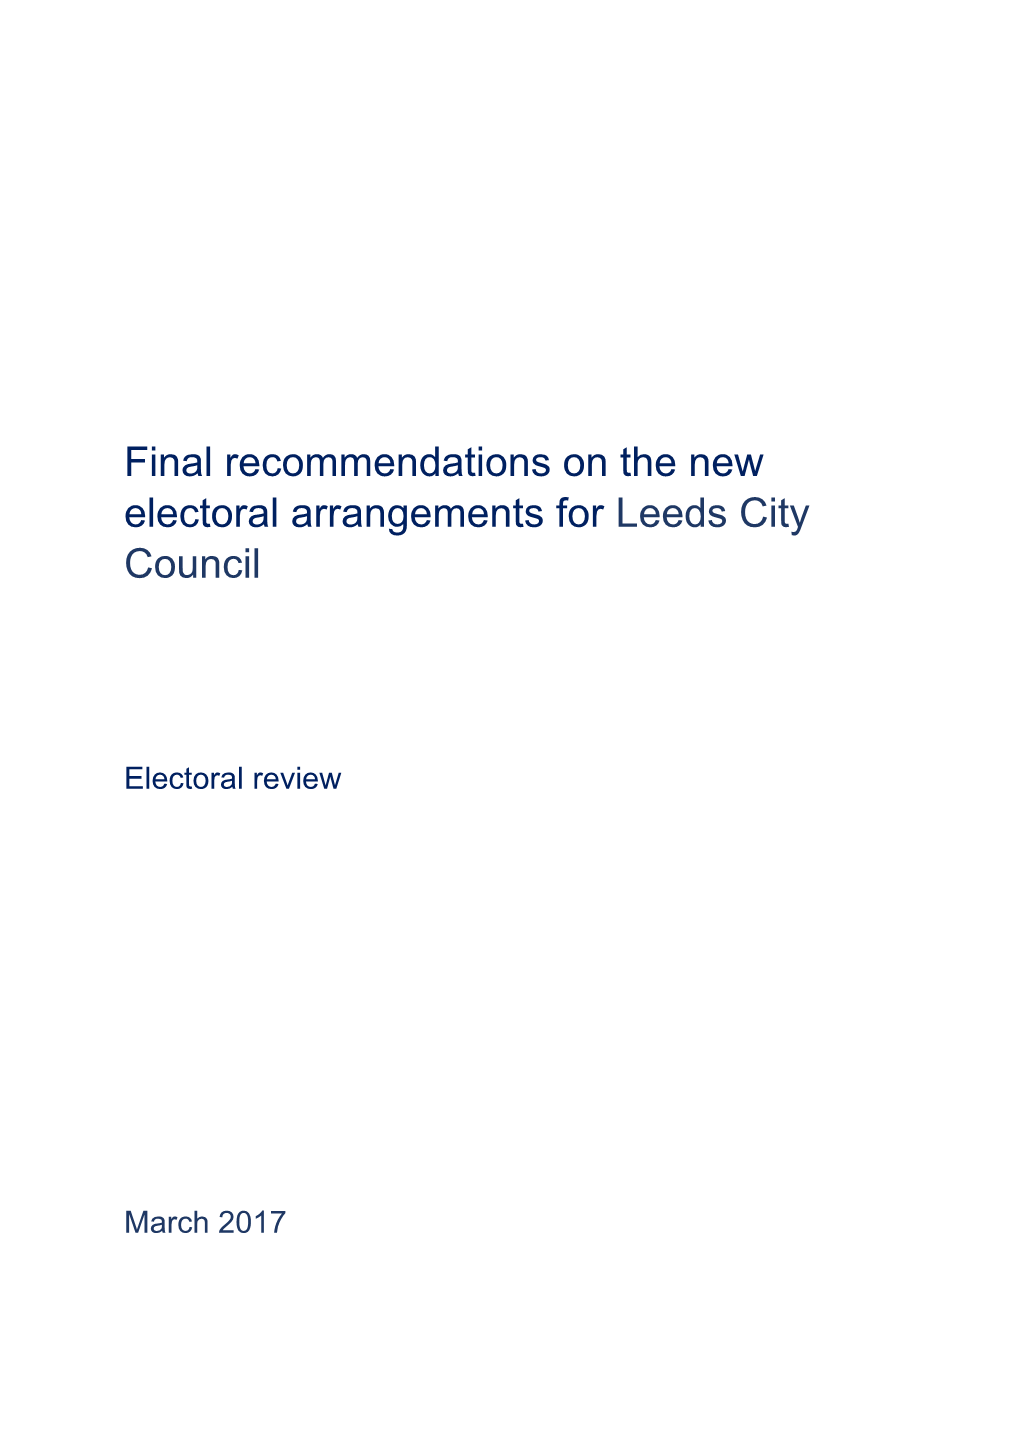 Final Recommendations on the New Electoral Arrangements for Leeds City Council